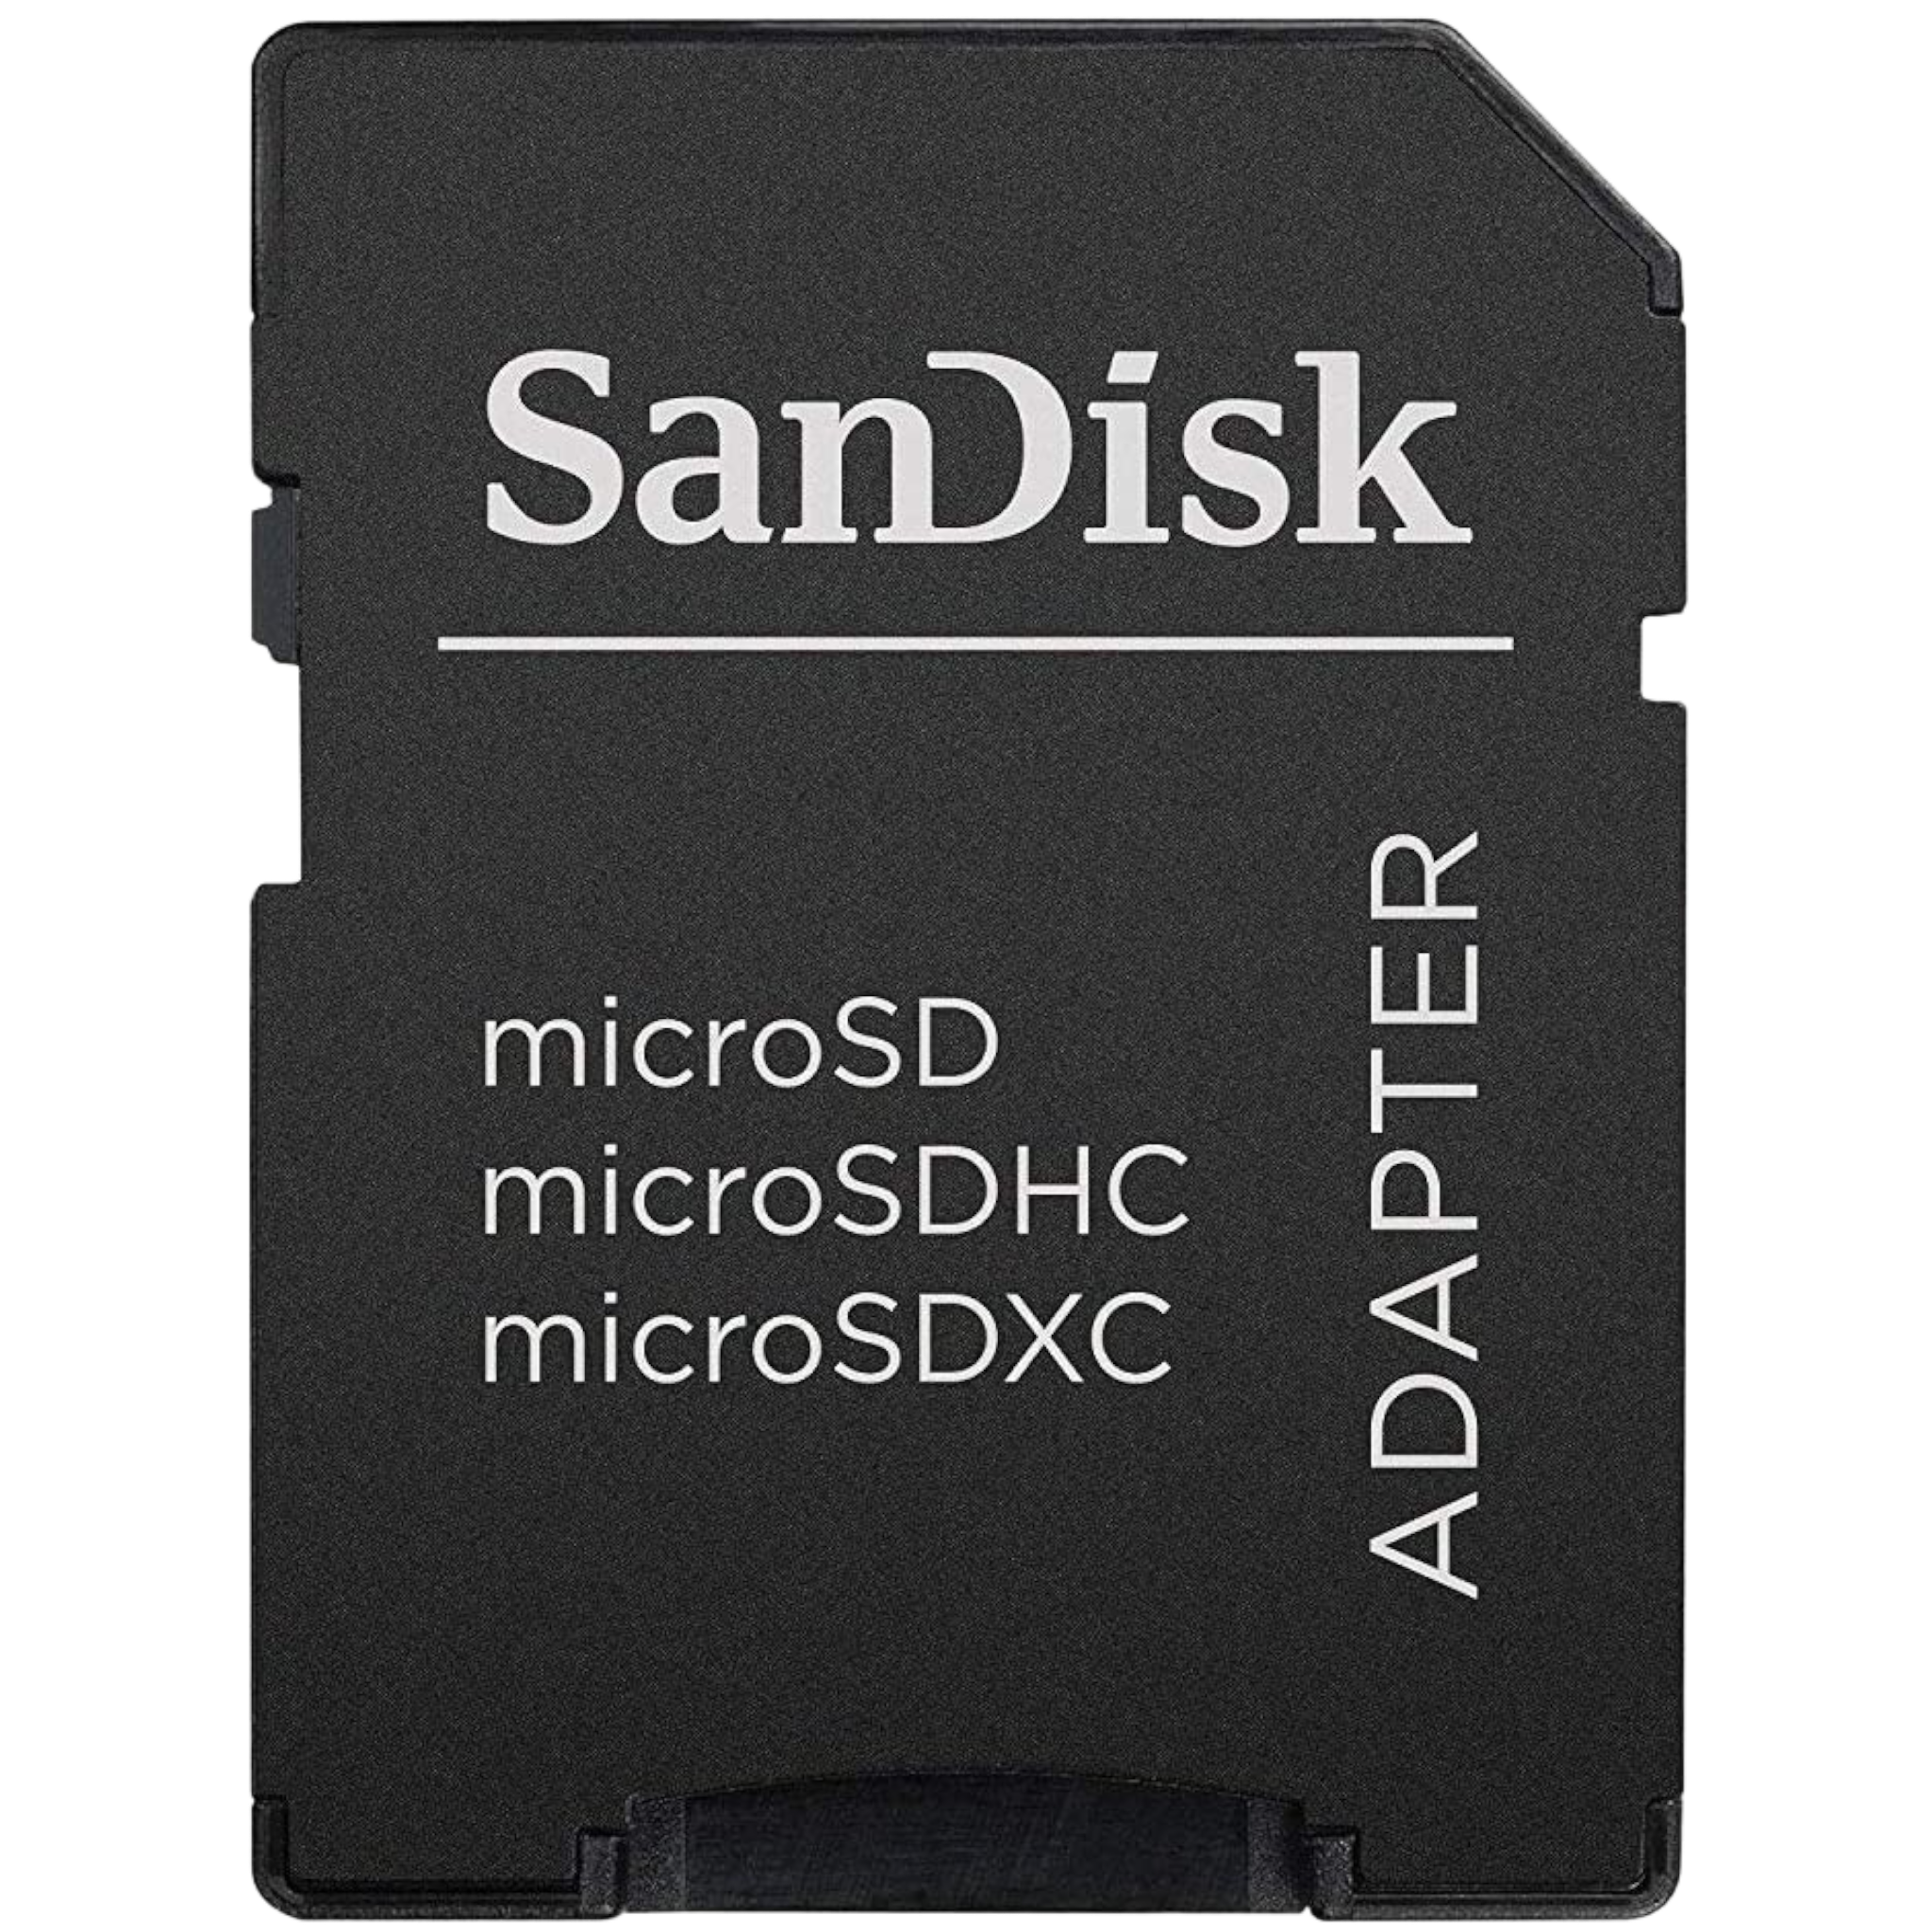 SanDisk Micro SD to SD Memory Card Adapter - Pro-Distributing